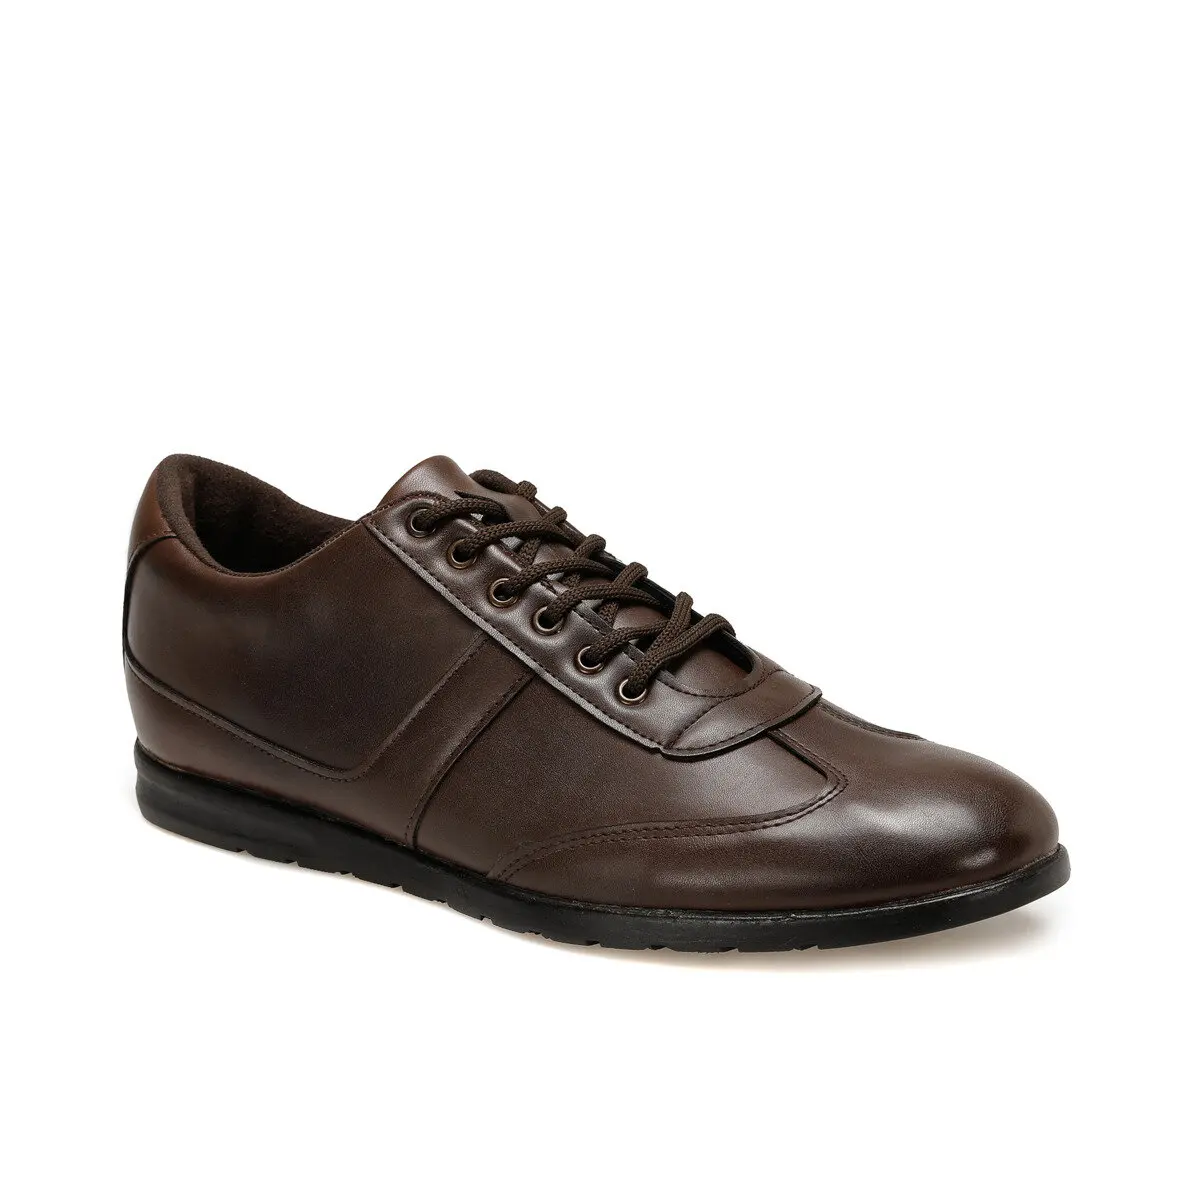 

FLO GBS118 Brown Men 'S Casual Shoes Oxide